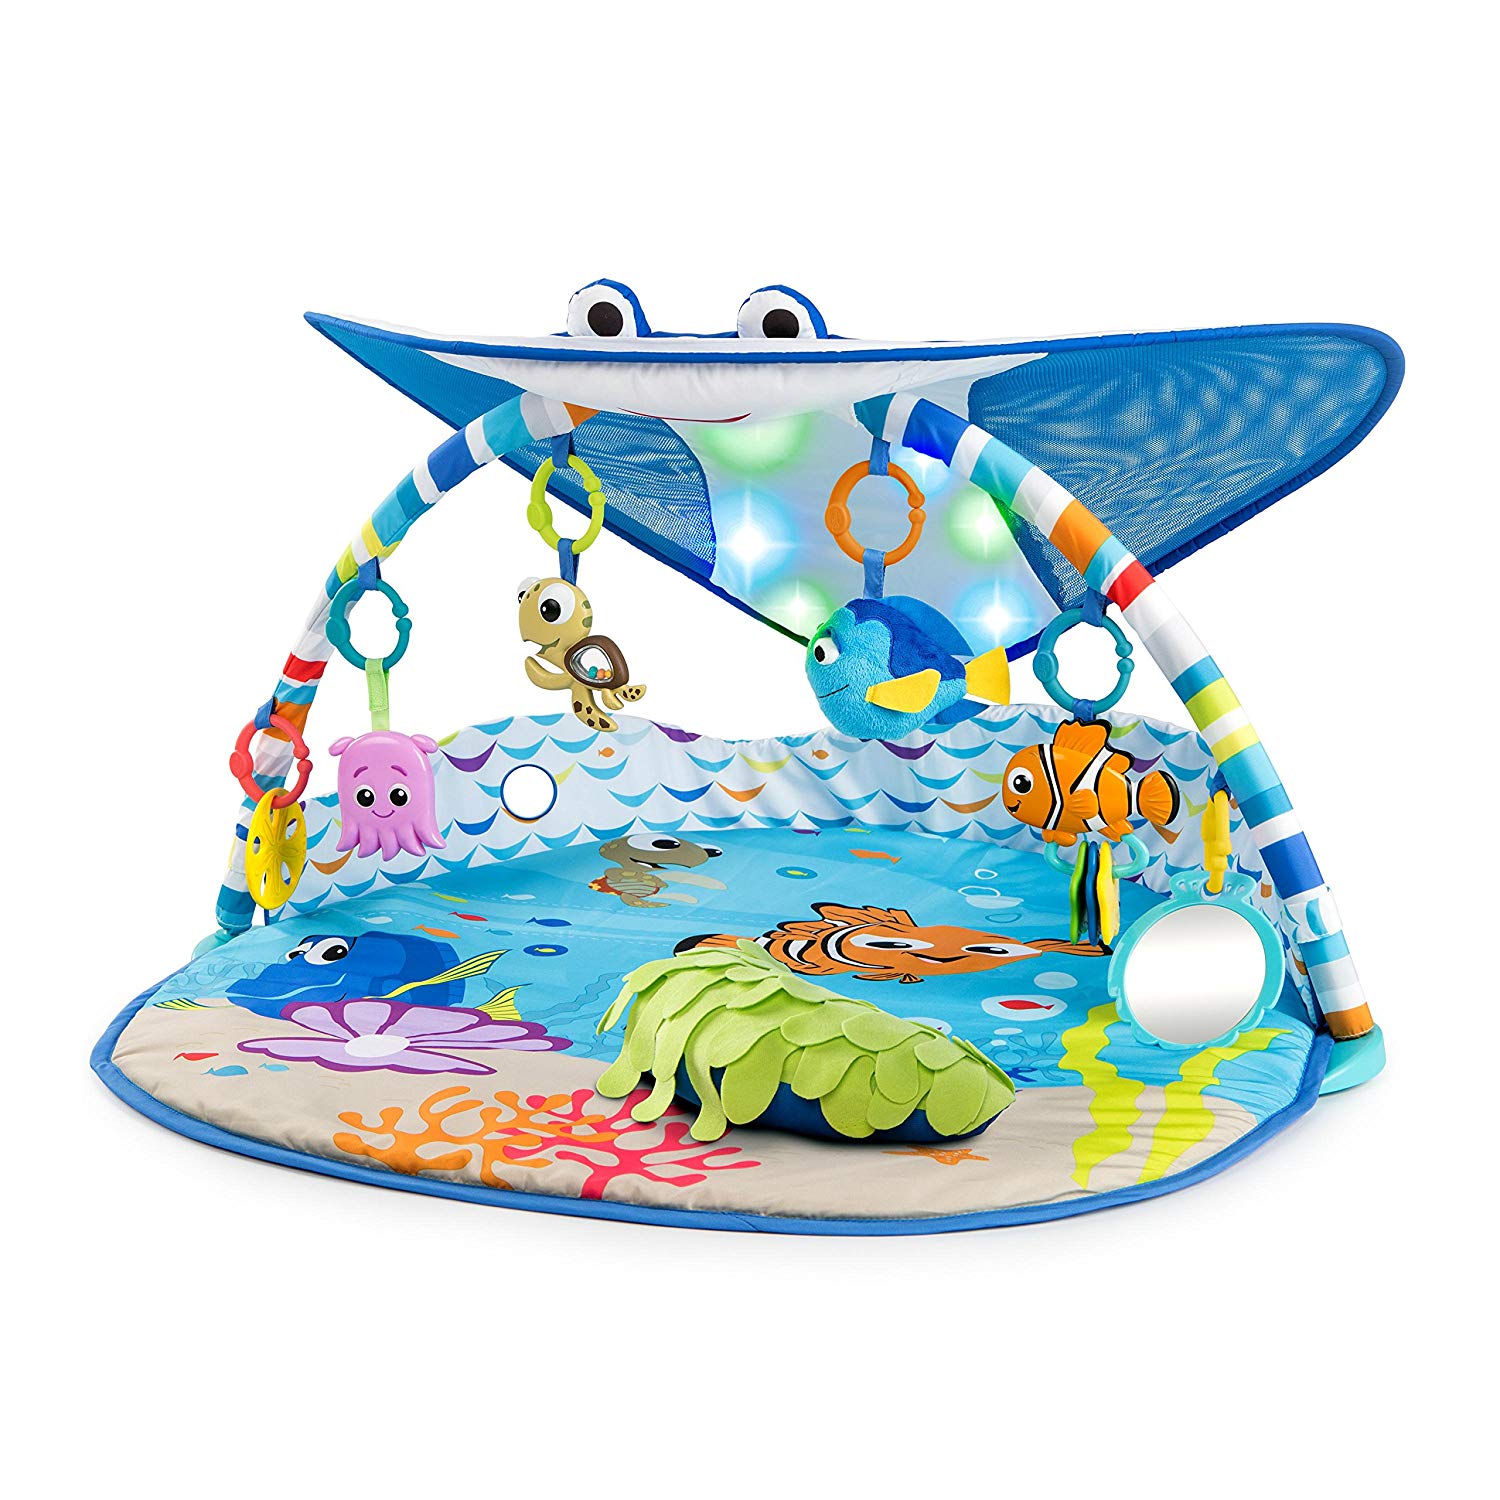 Disney Baby Finding Nemo Play Mat with Arch, Lights and Melodies